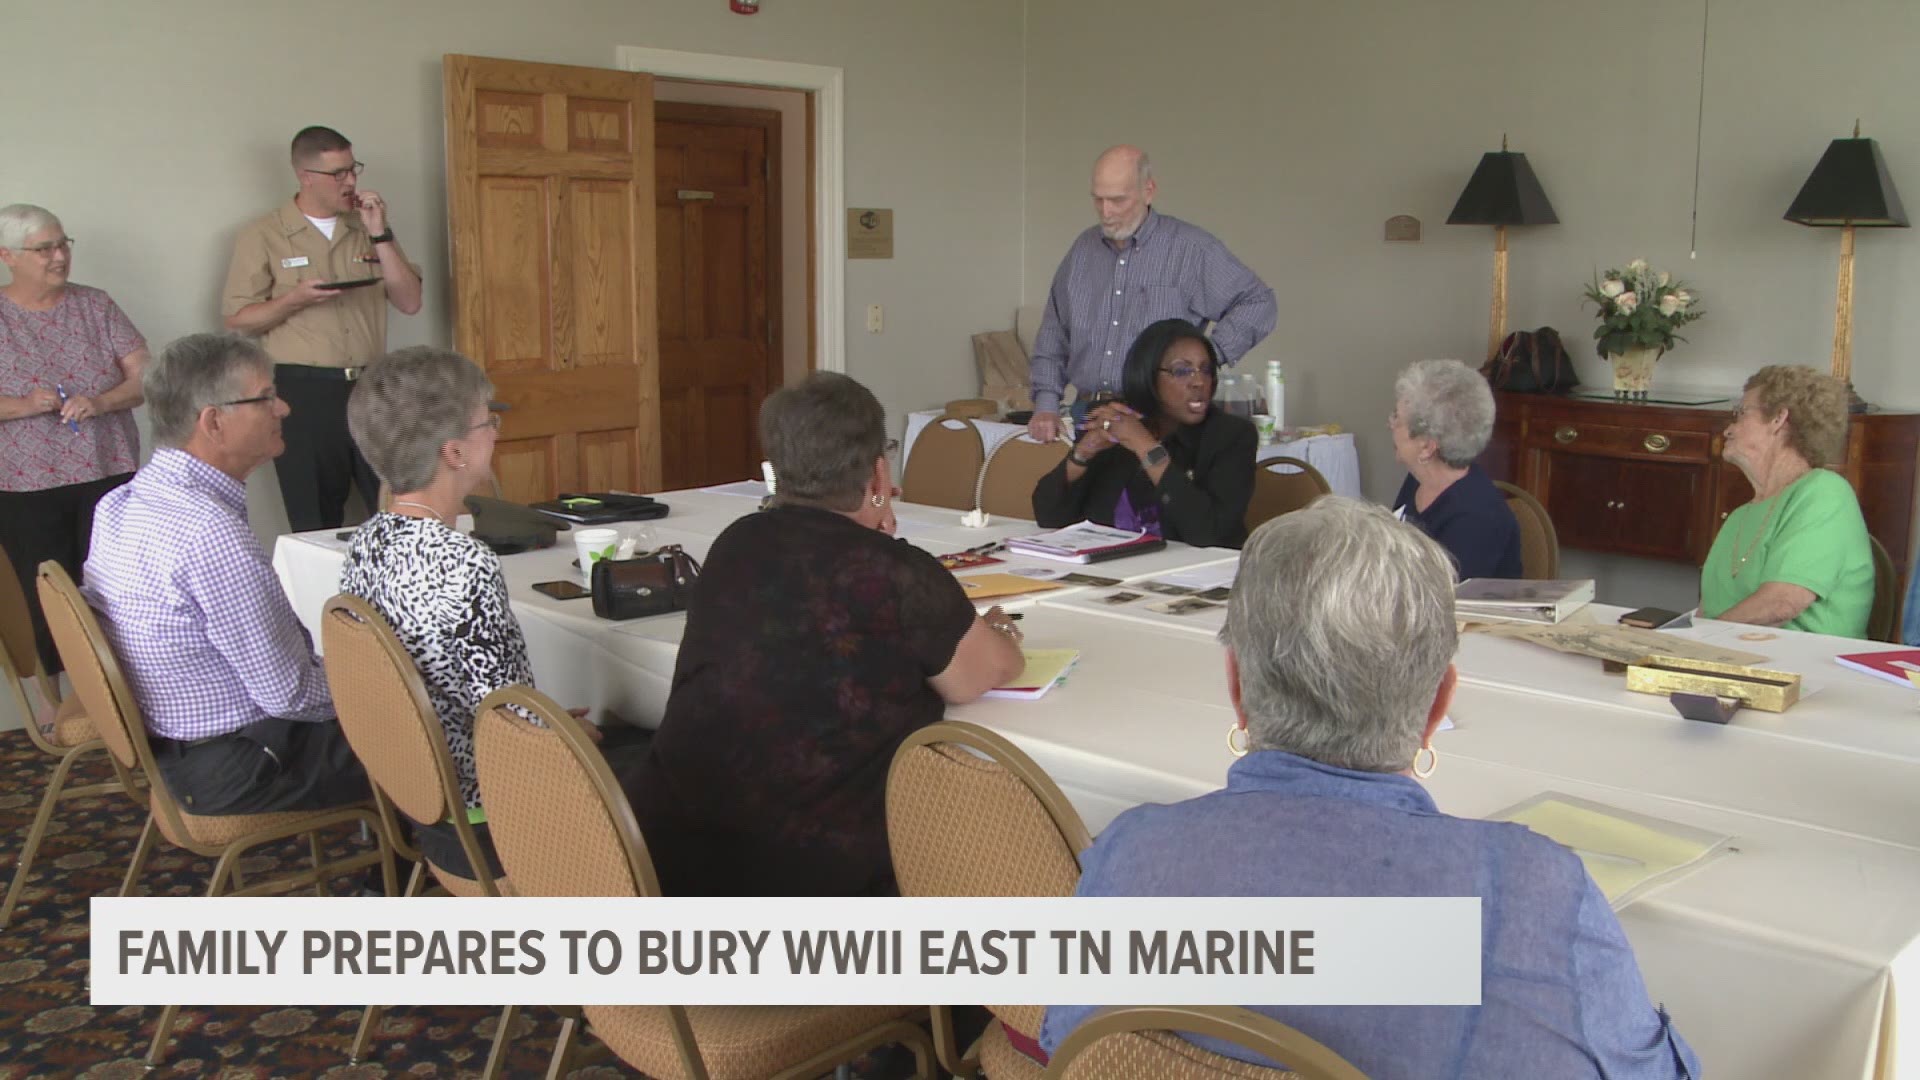 Tonight, we're hearing from the family members preparing to bury an East Tennessee marine killed in World War II for the first time.